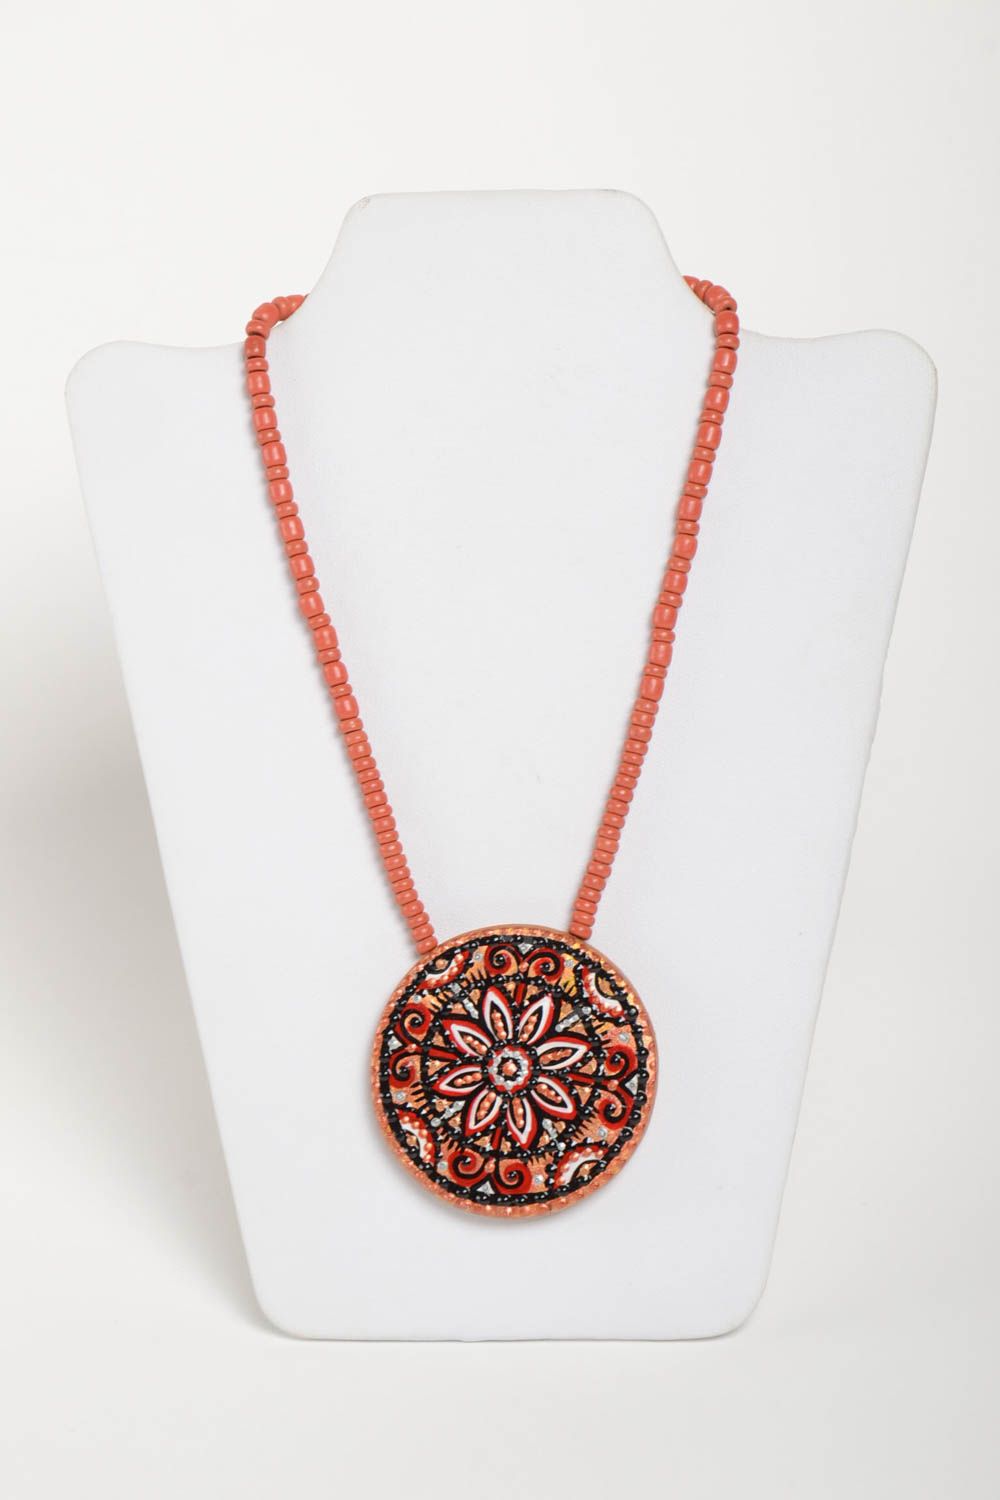 Ethnic jewelry handmade necklace ceramic jewelry pendant necklace gifts for her photo 2